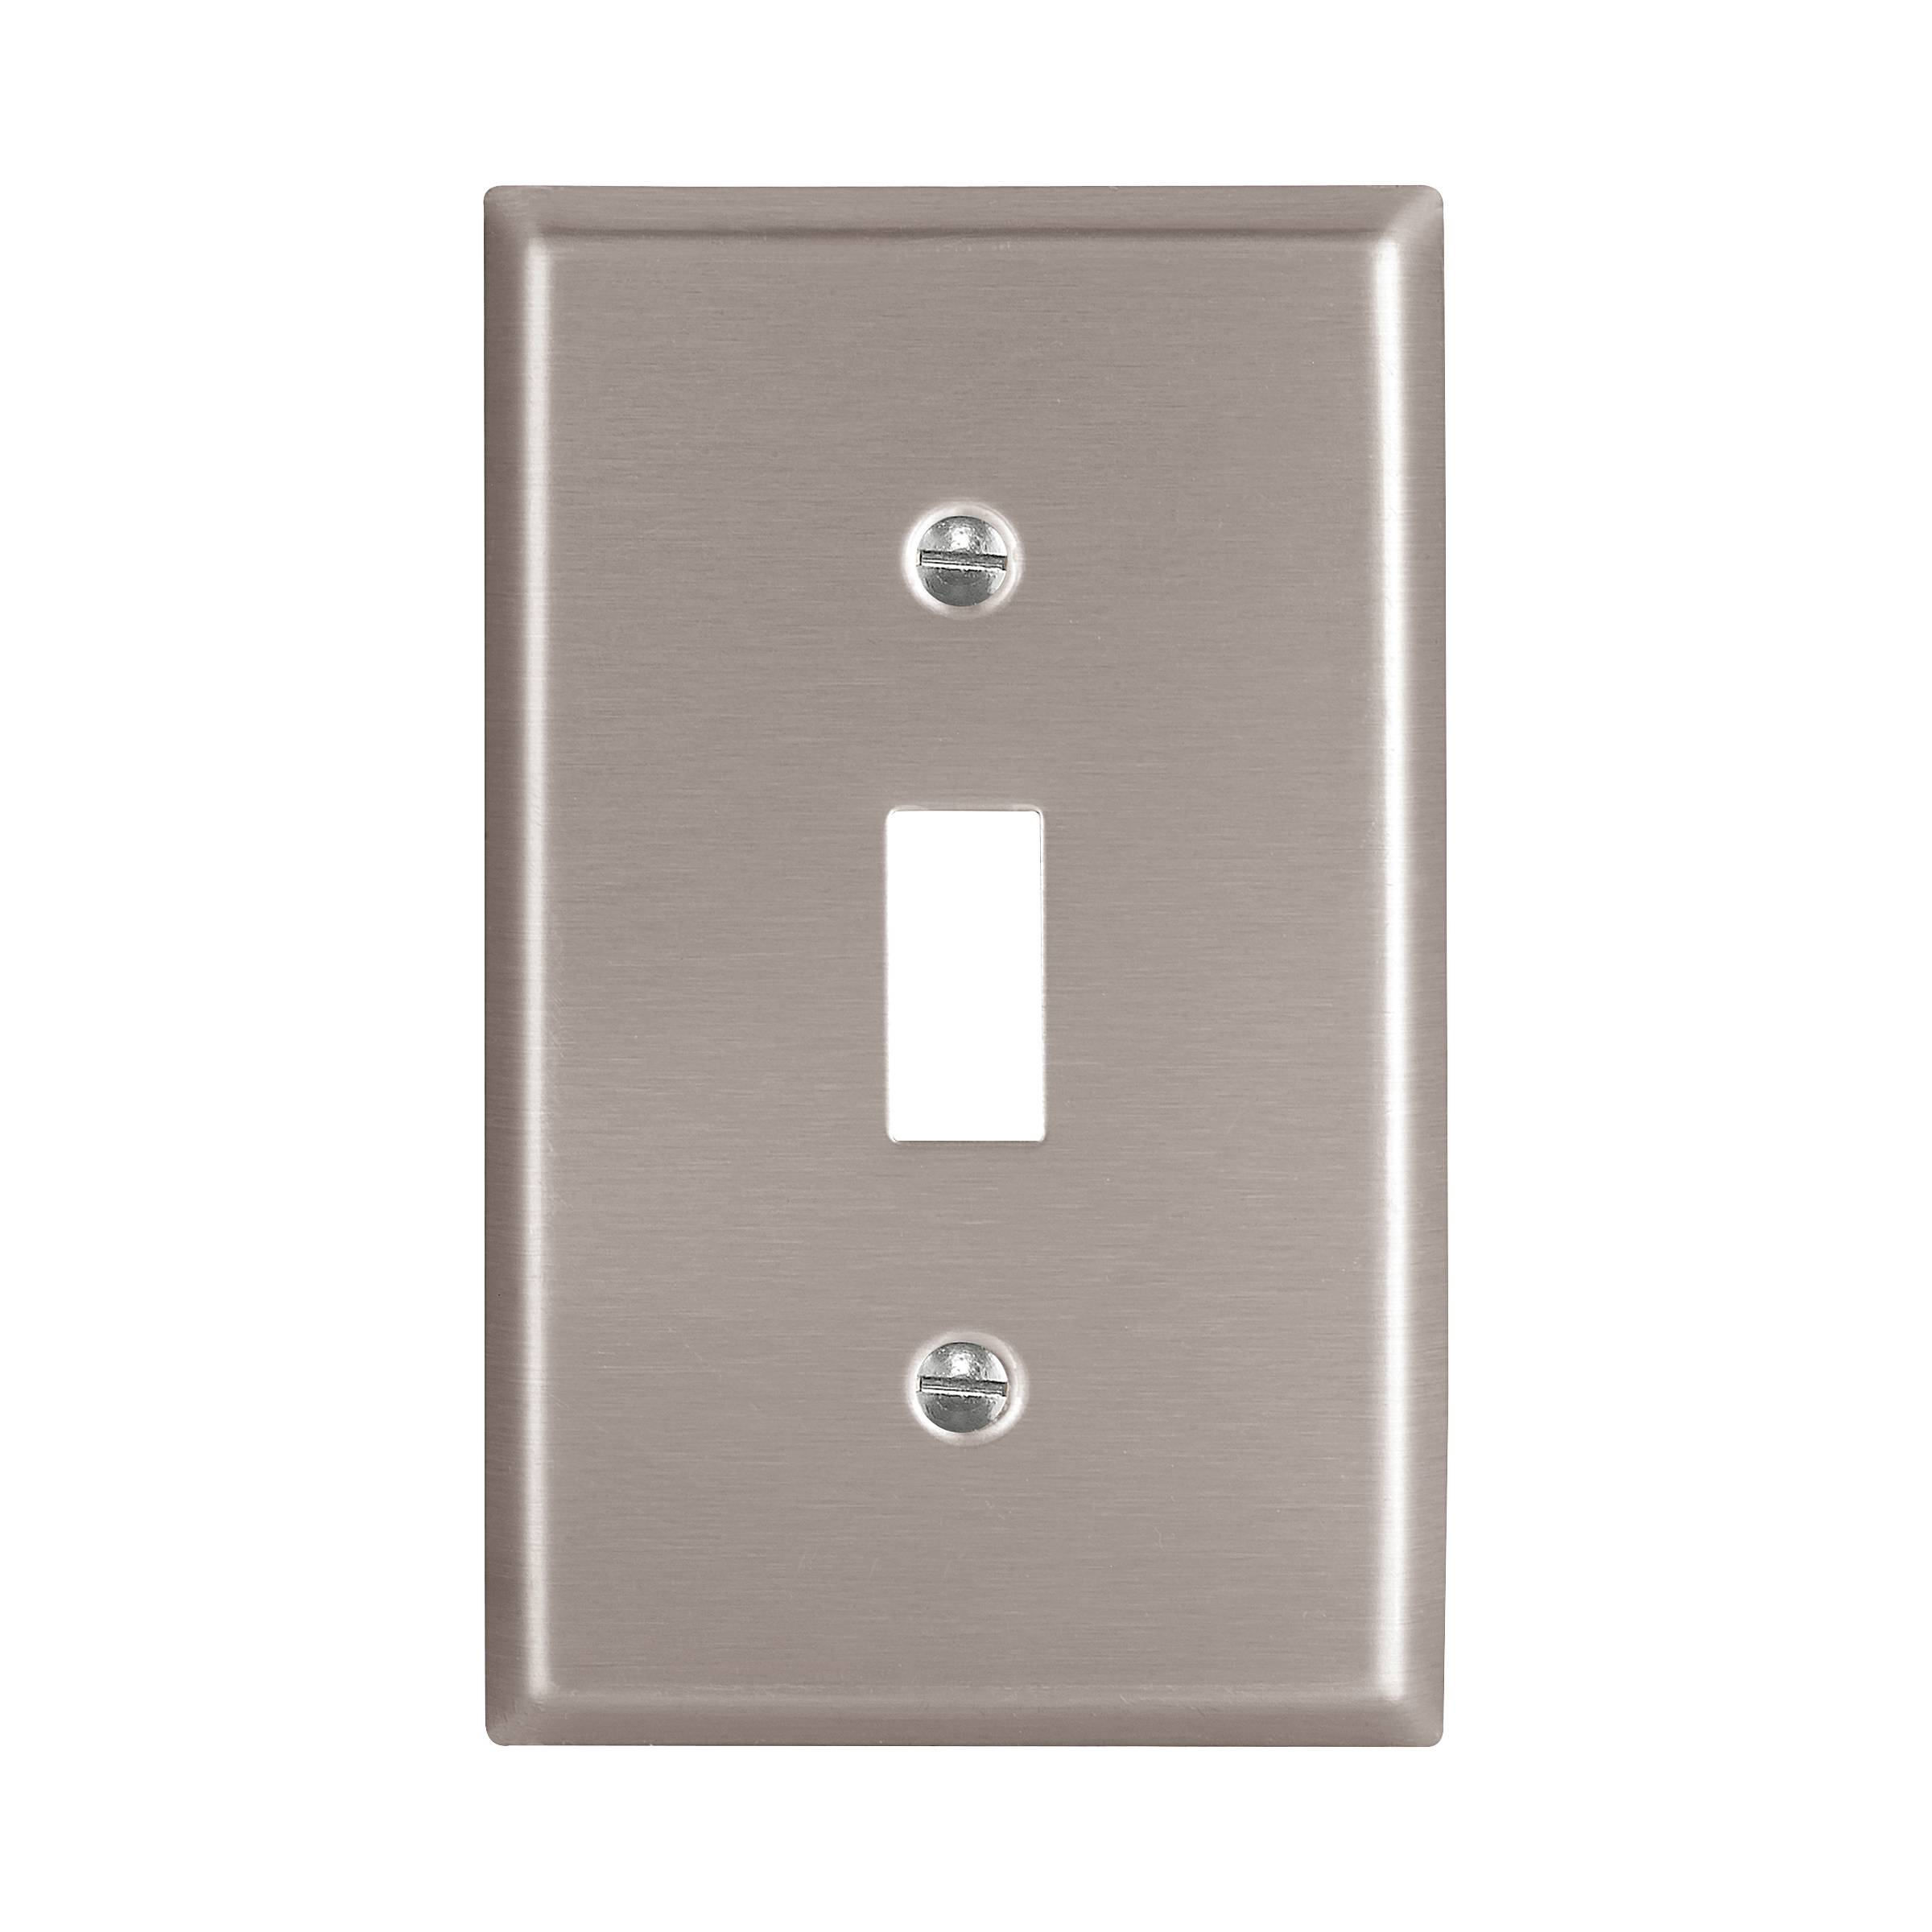 EATON Arrow Hart™ Eaton Wiring Devices 93071-SP-L 93000 Standard Toggle Switch Wallplate, 1 Gangs, 4-1/2 in H x 2-3/4 in W, 302/304 Stainless Steel, Clear